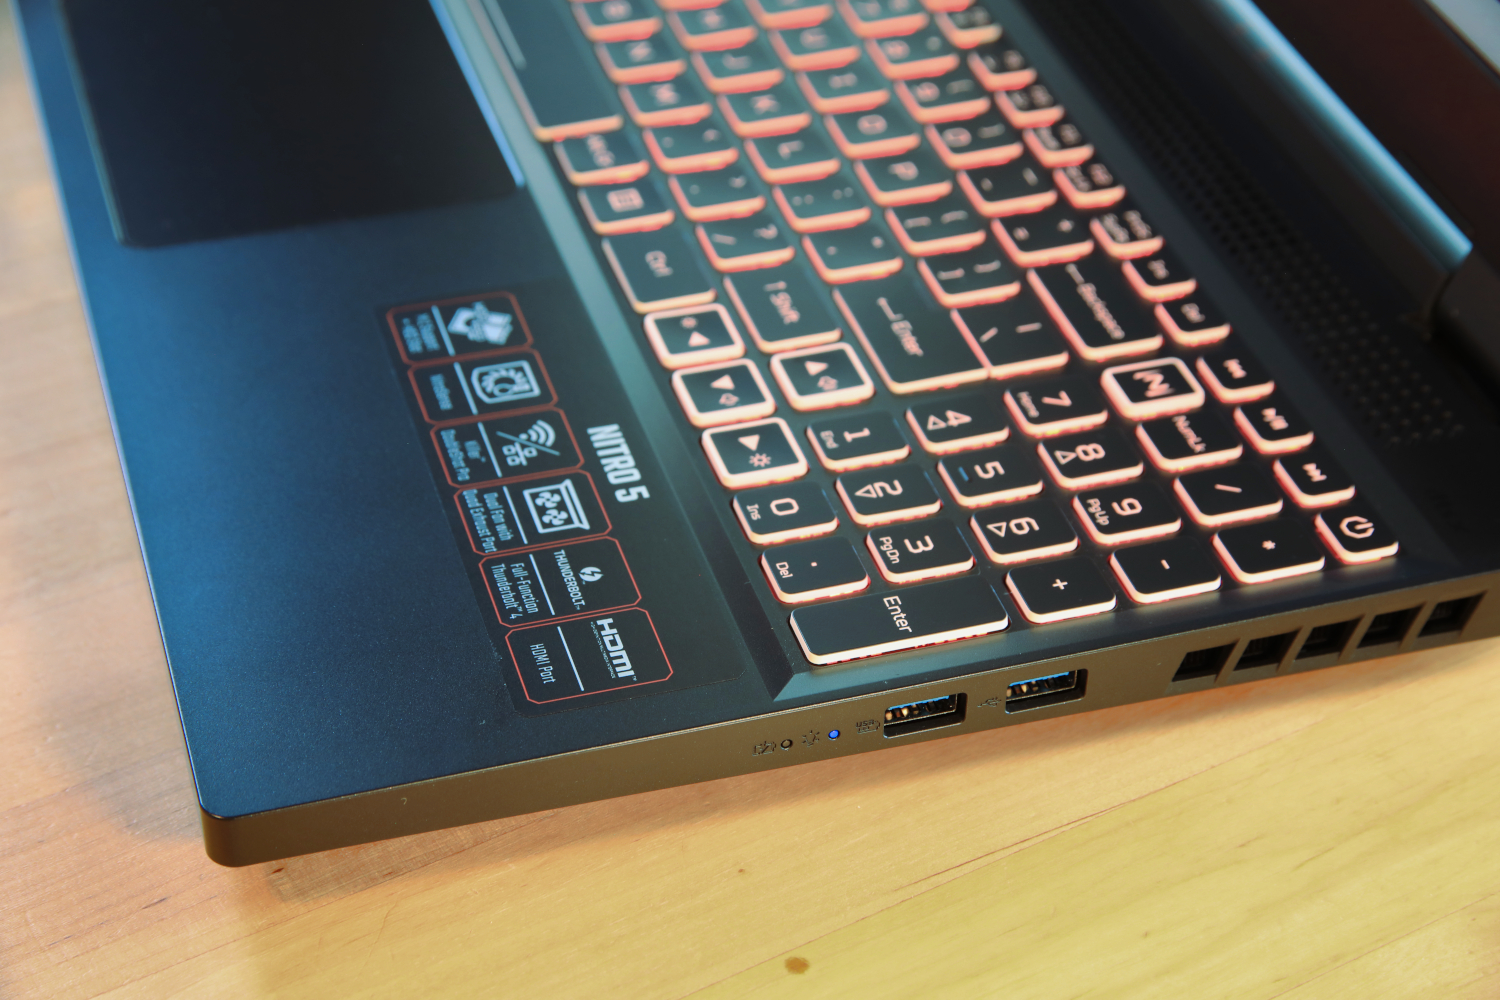 Acer Nitro (2022) review: A gaming laptop with killer value PCWorld